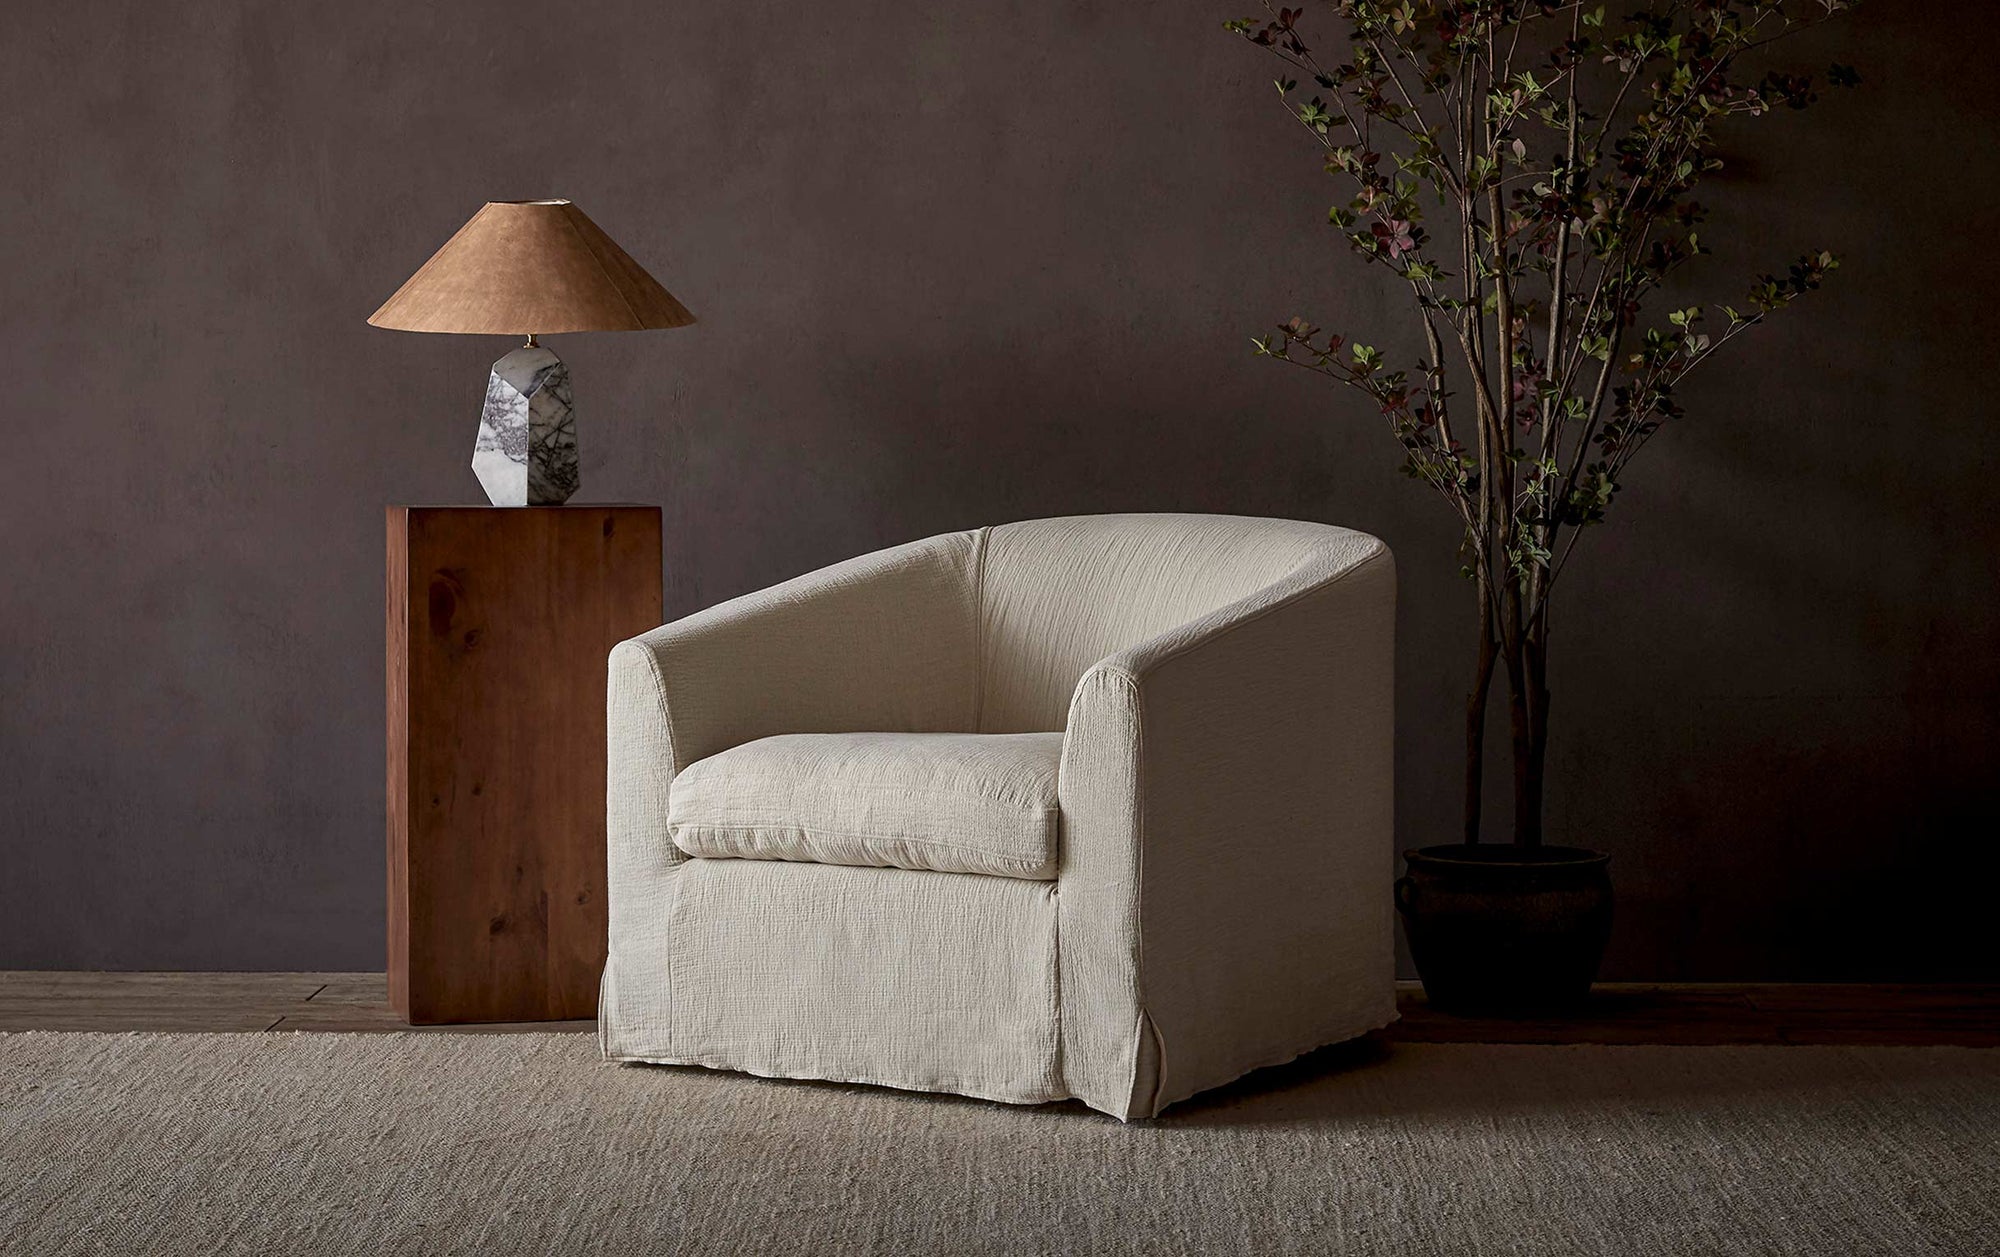 Ziki Chair in Corn Silk, a light beige Washed Cotton Linen, placed in a room between a potted tree and a table lamp on a side table